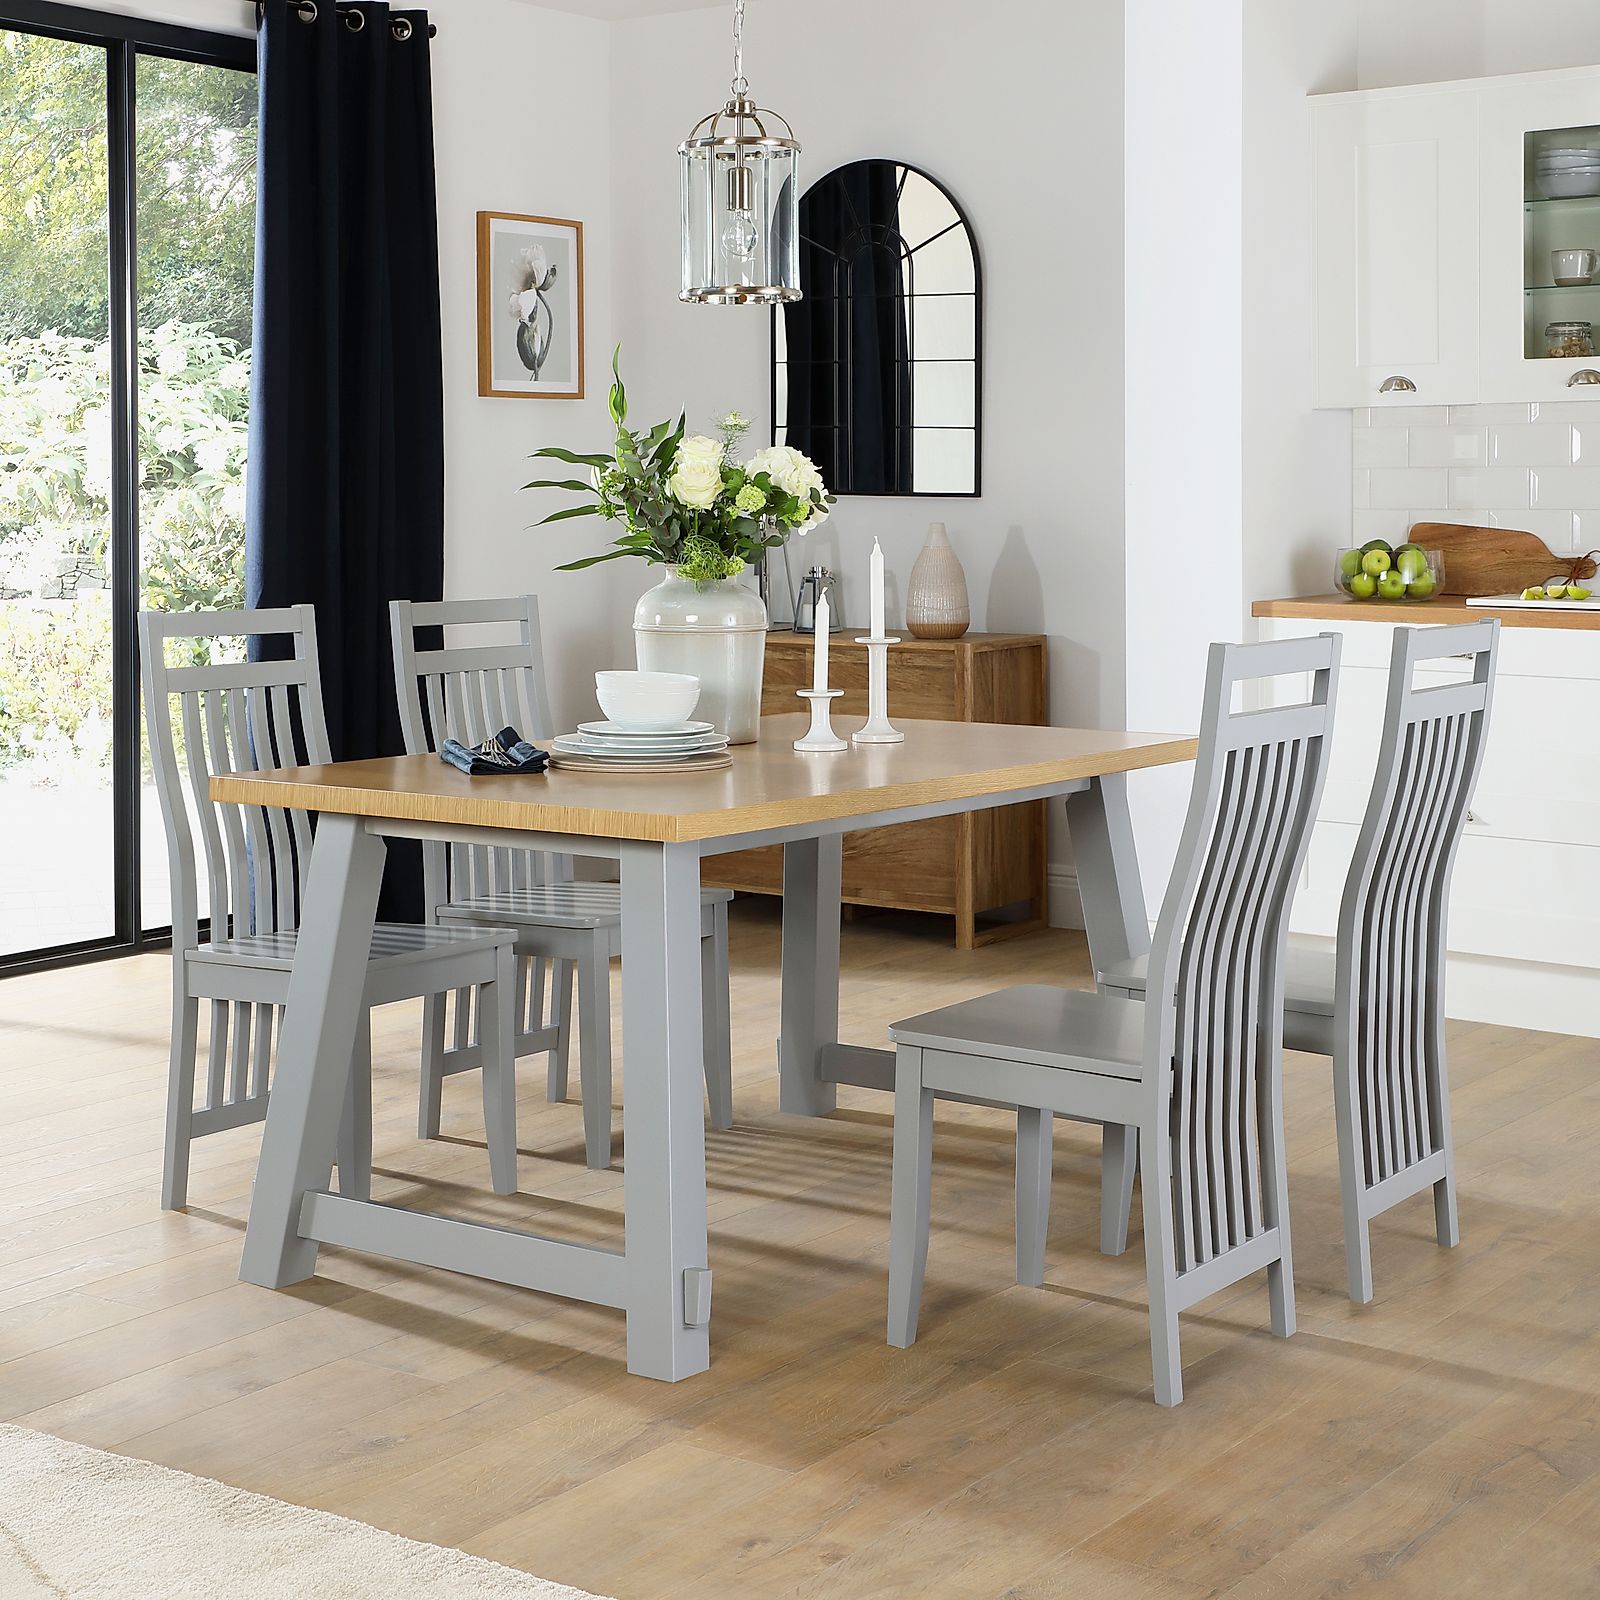 Croft Painted Grey and Oak Dining Table with 4 Java Grey Chairs | Furniture Choice